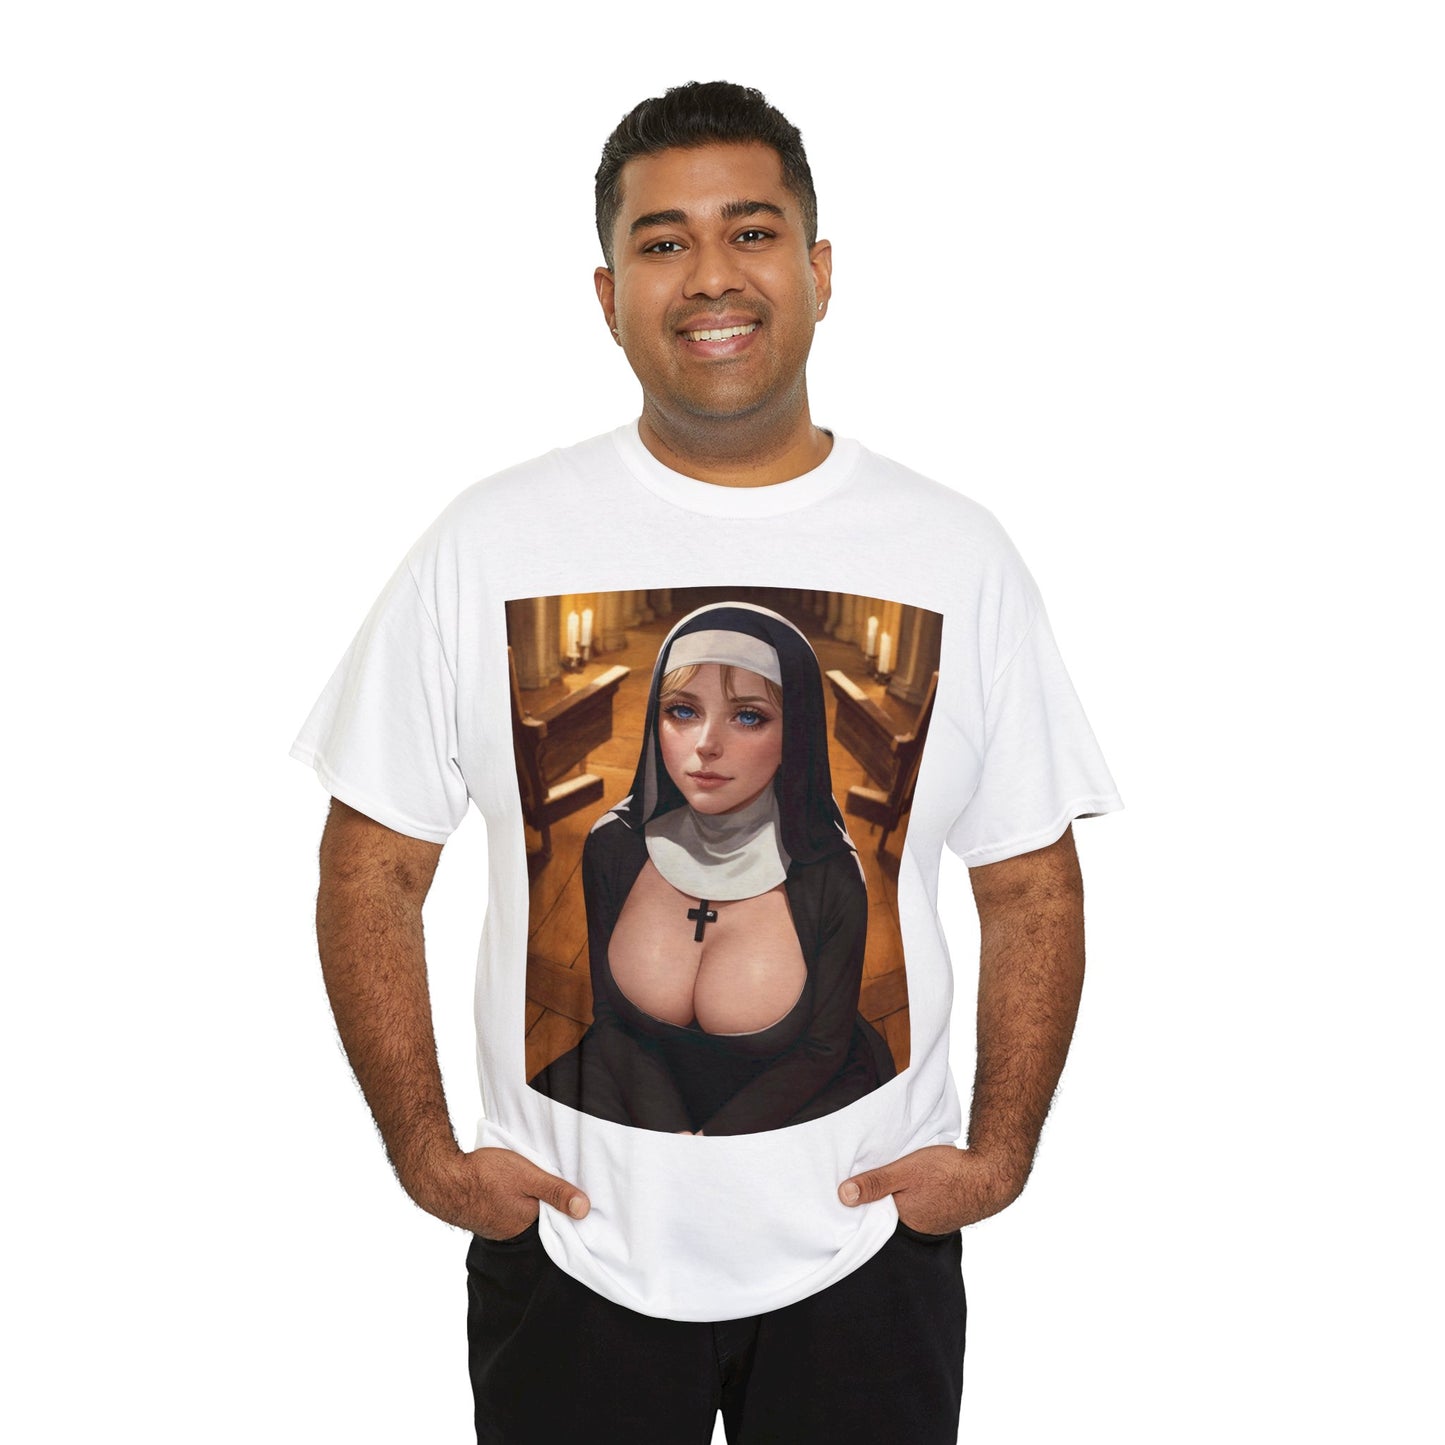 Nun with milkers